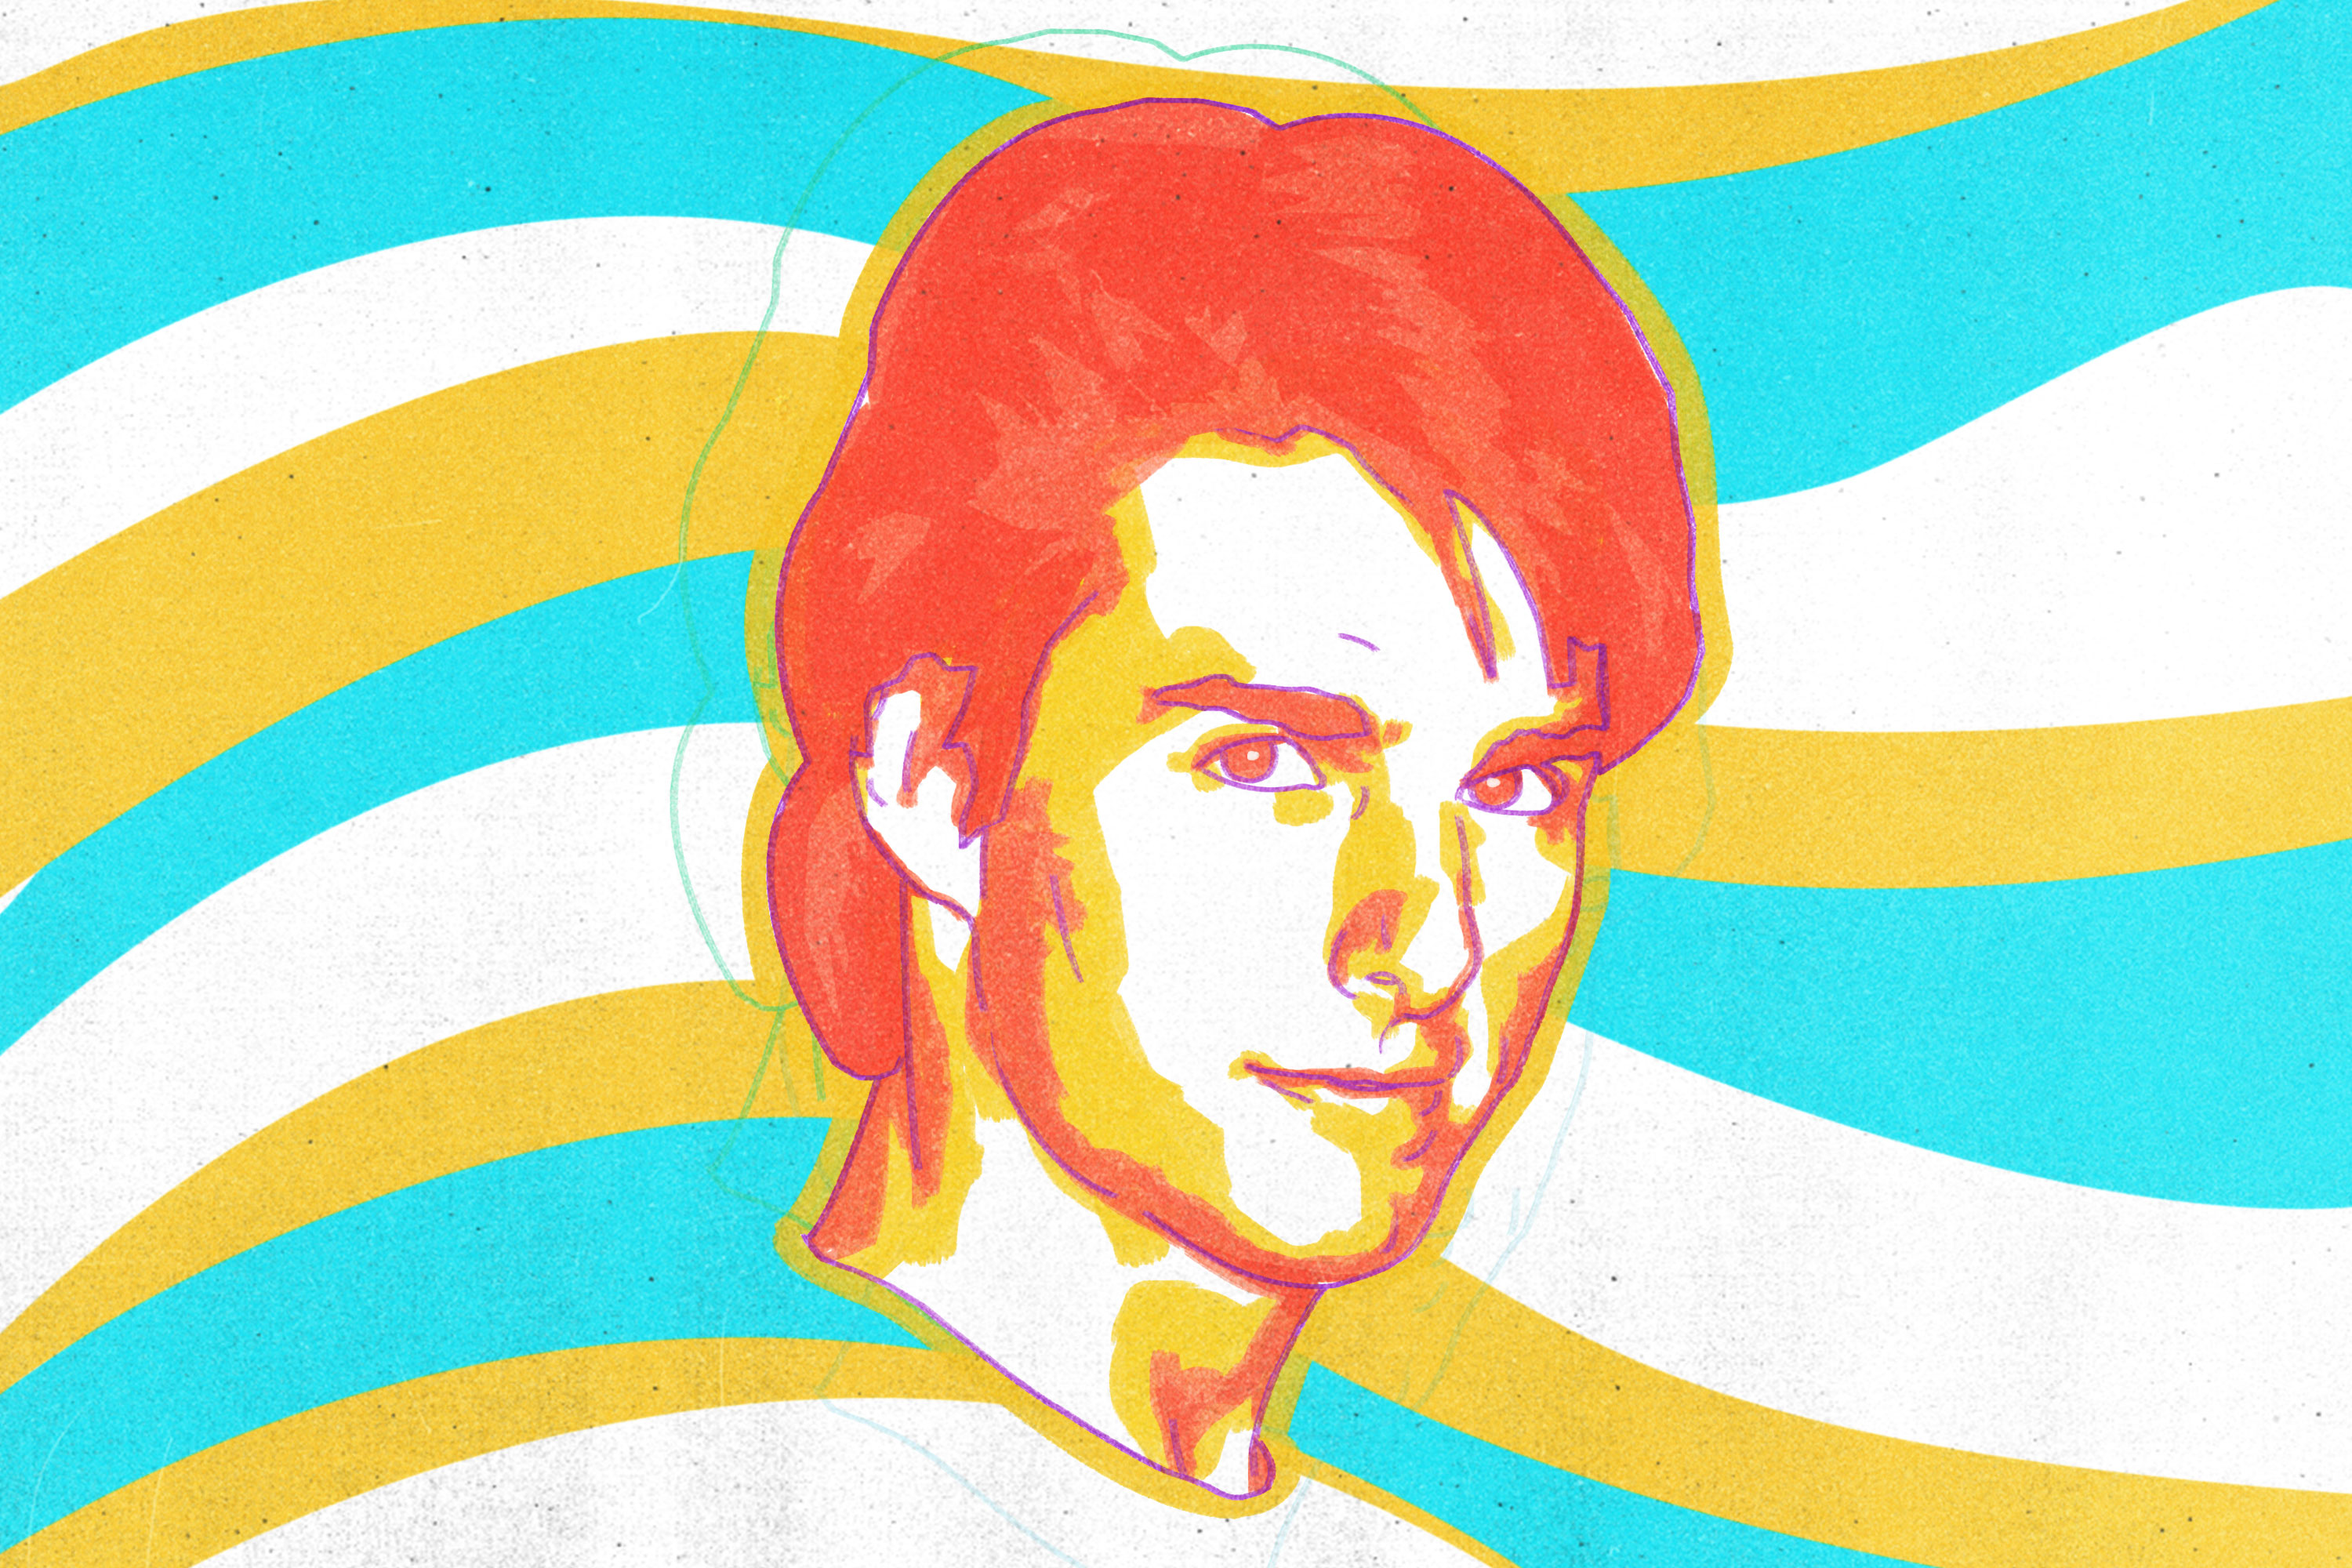 A watercolor-style illustration of Tom Cruise